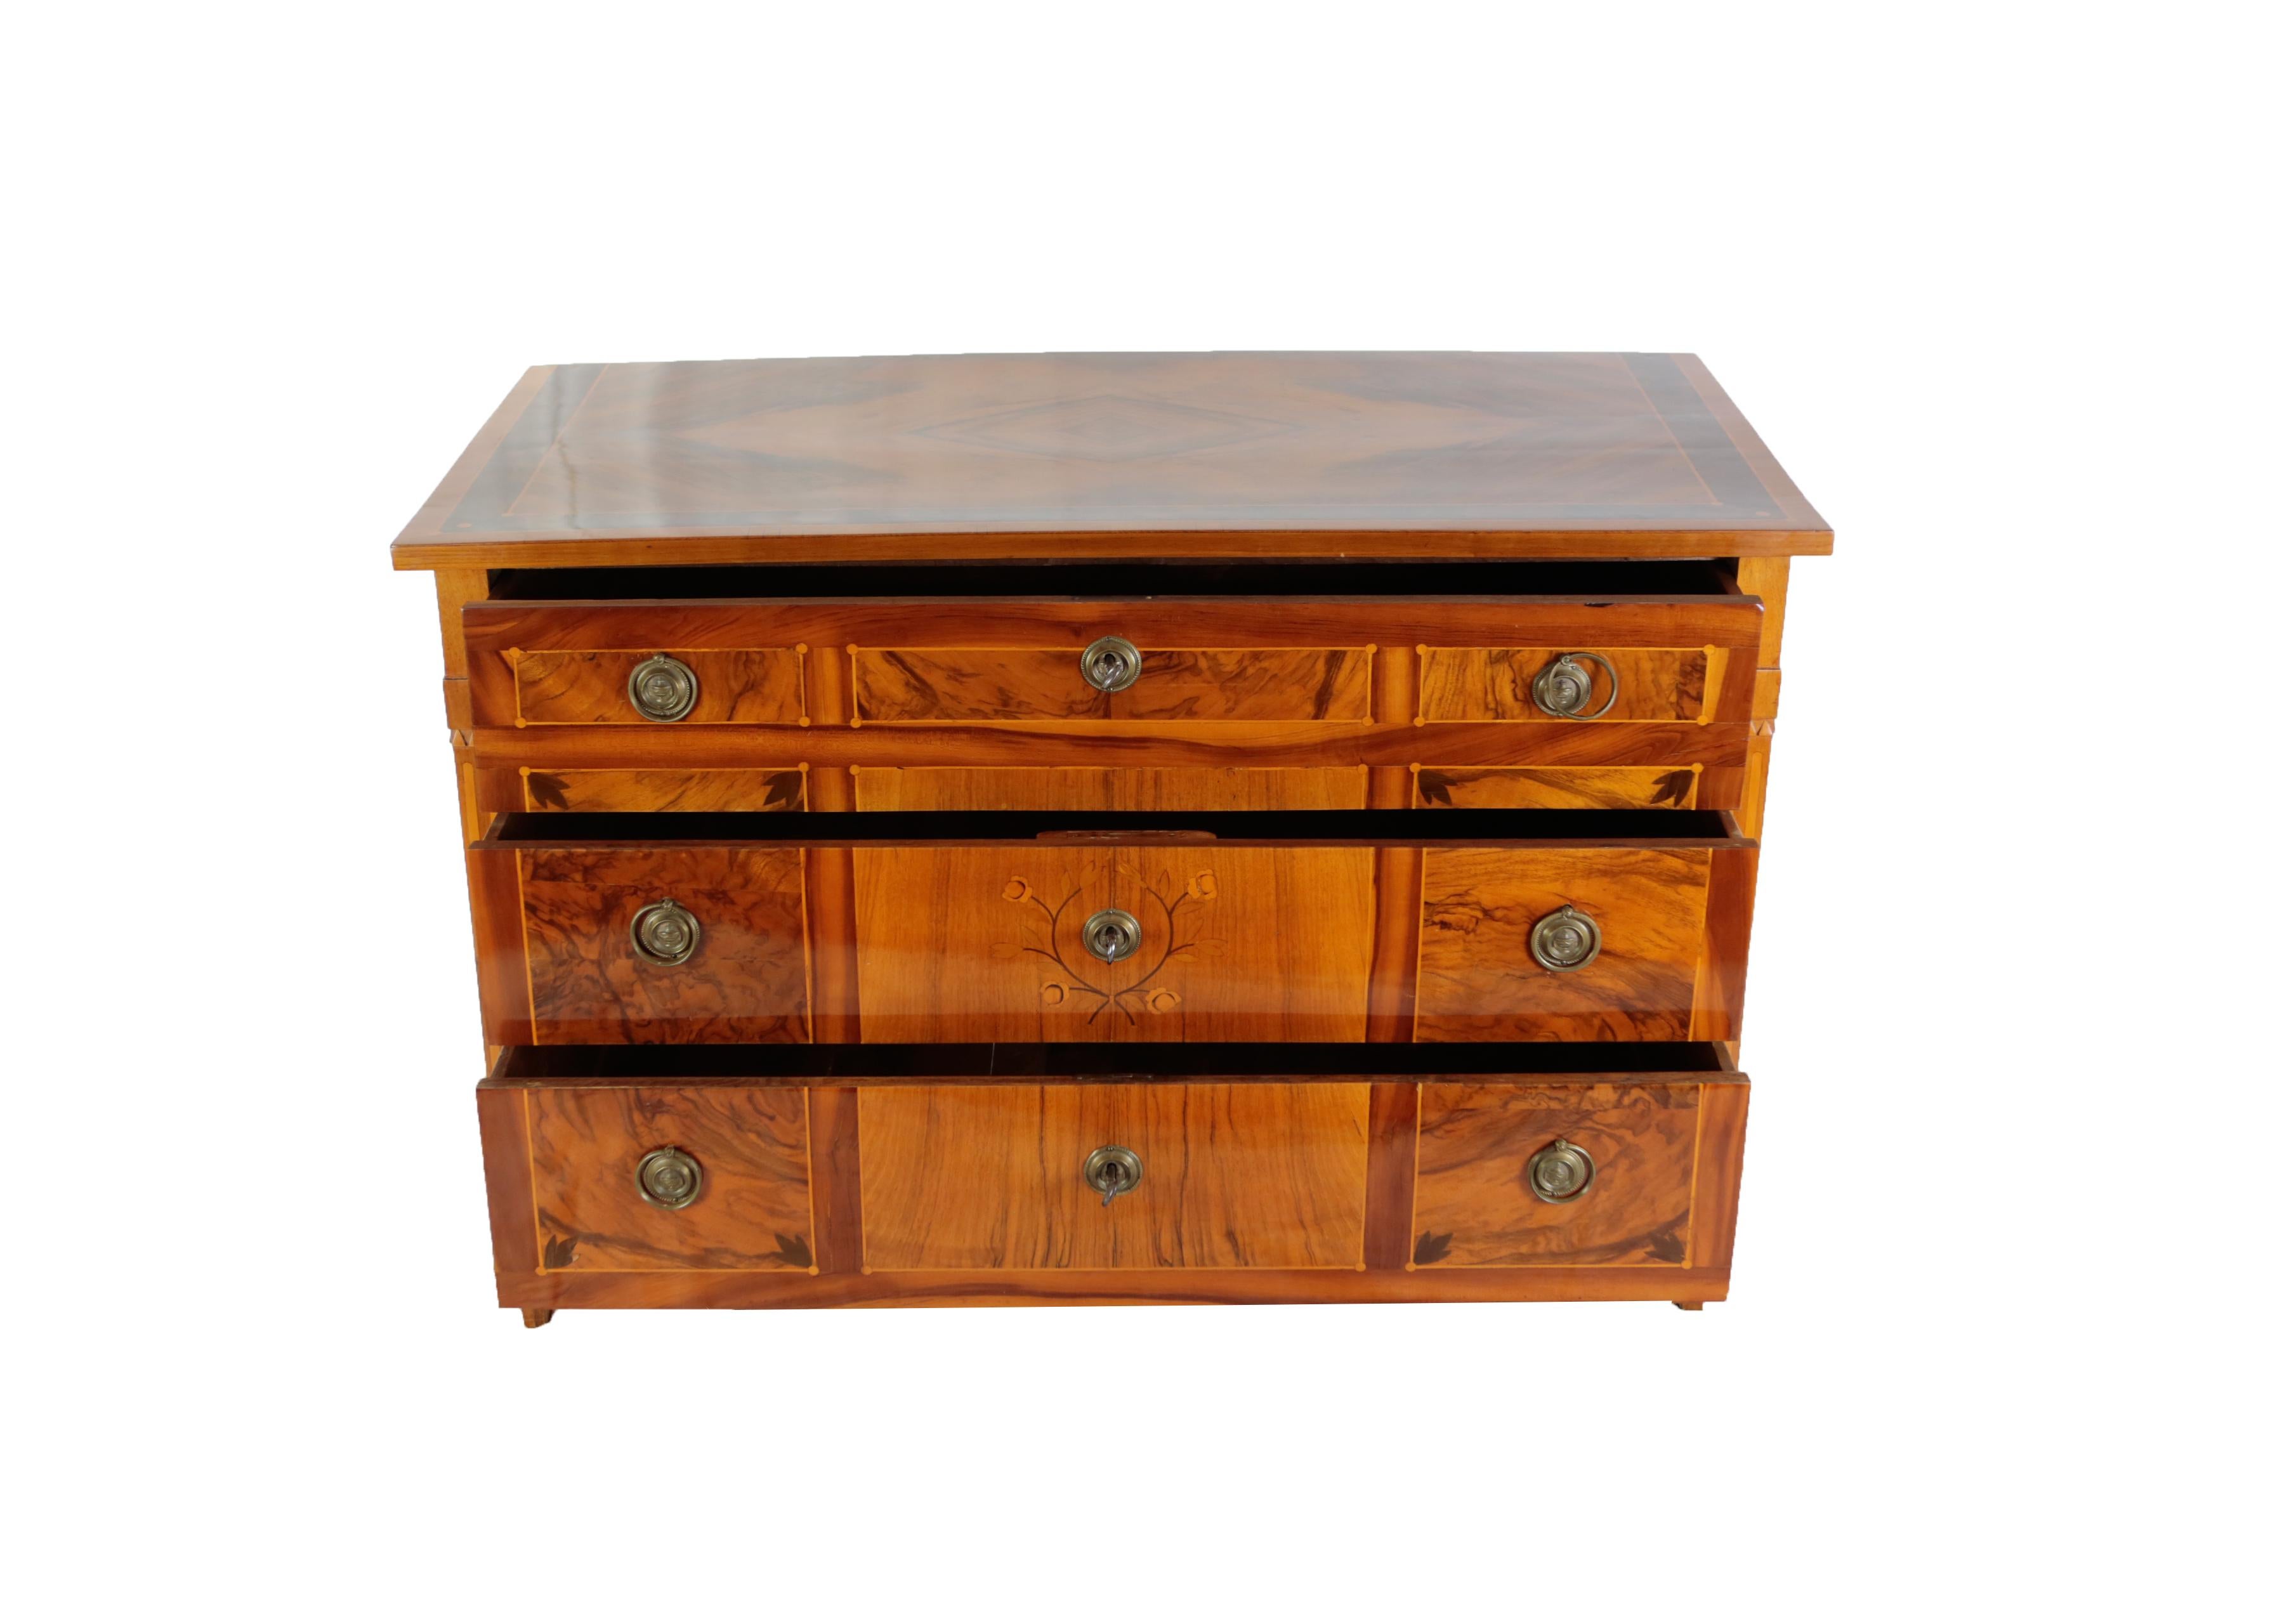 Louis XVI Late 18th Century Louis Seize Chest of Drawers, circa 1780, Walnut and Nutroot